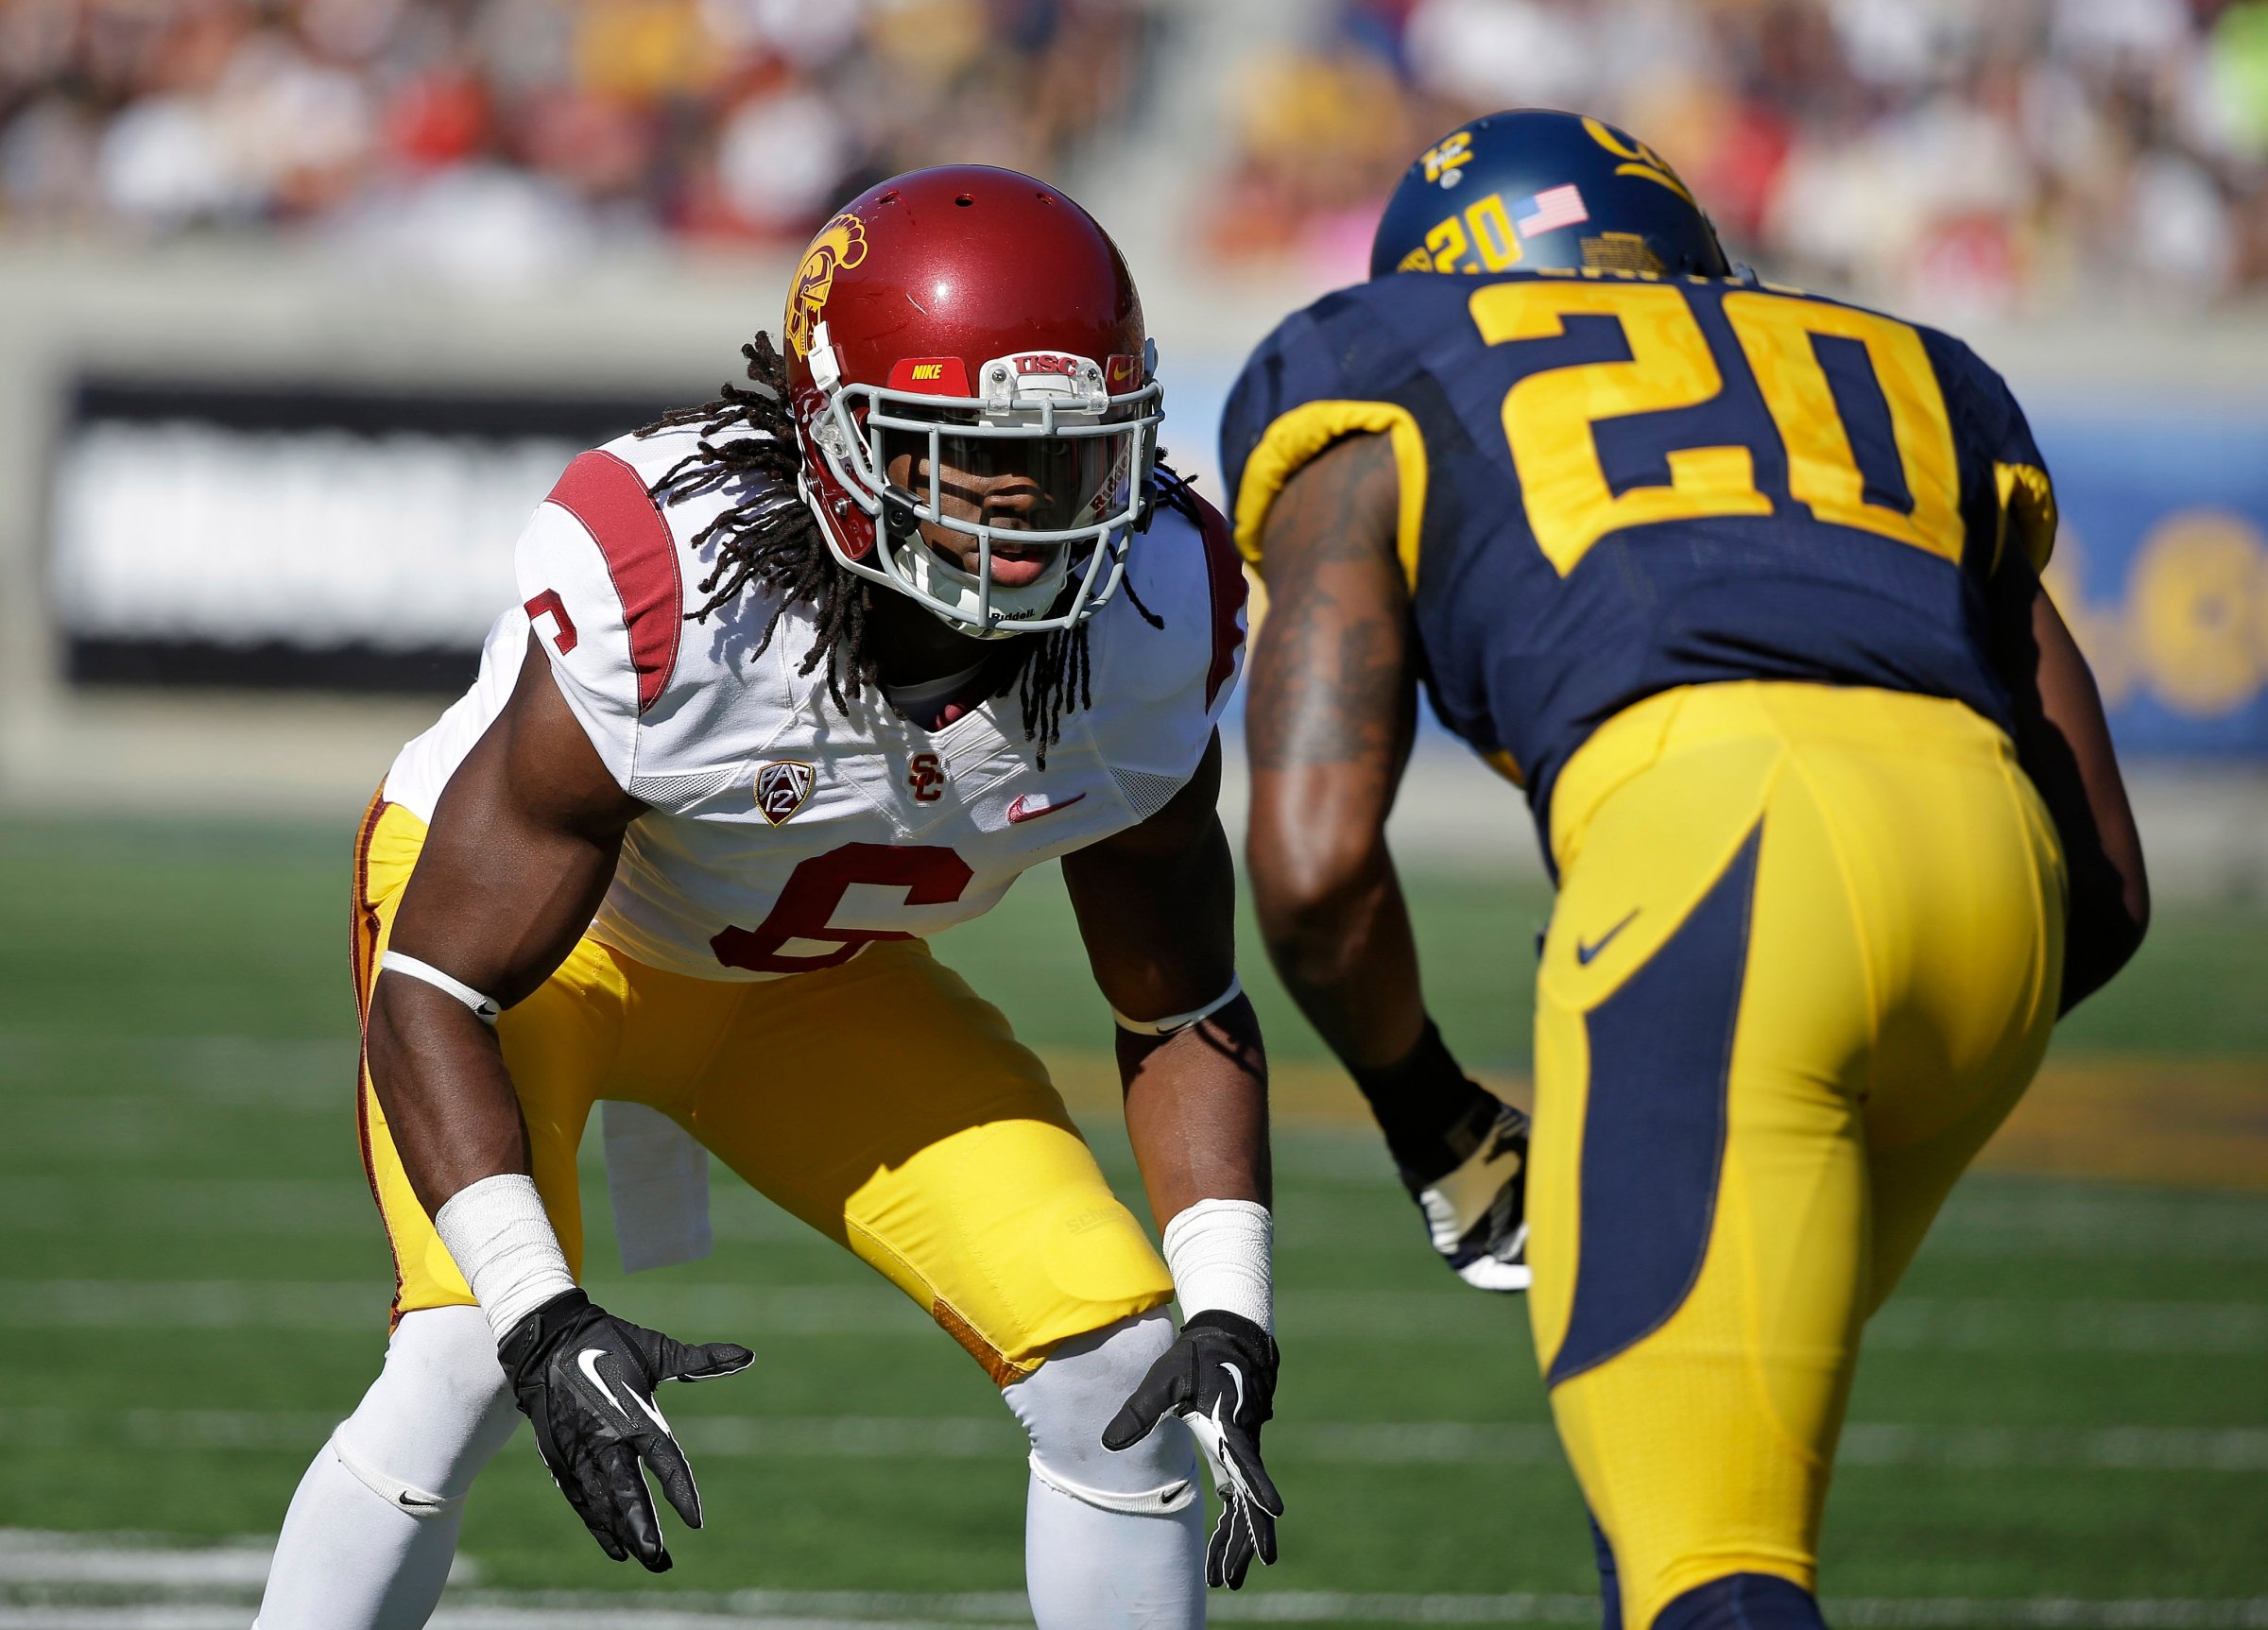 Southern California cornerback Josh Shaw lines up against California defensive back Isaac Lapite during the first quarter of a NCAA college football game in Berkeley, Calif.